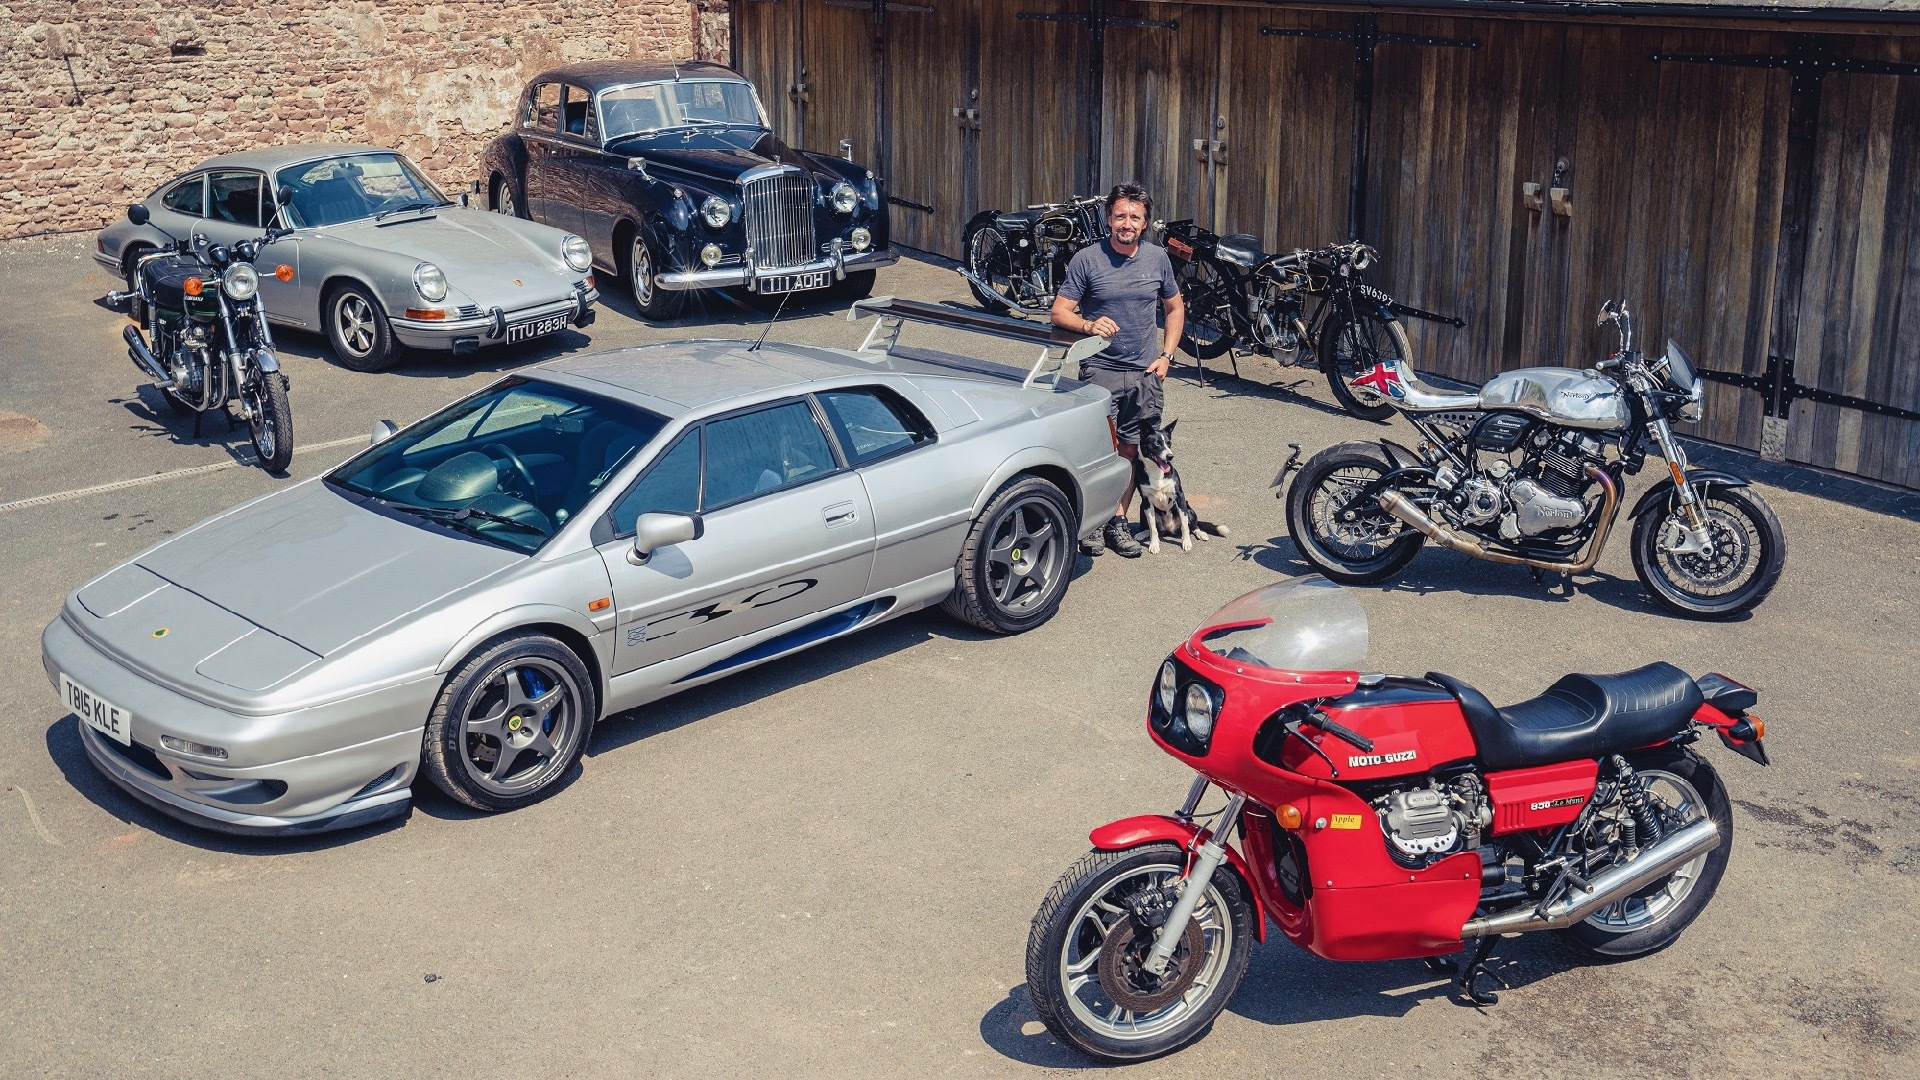 Richard Hammond's car and motorcycle collection (photo via Silverstone Auctions)